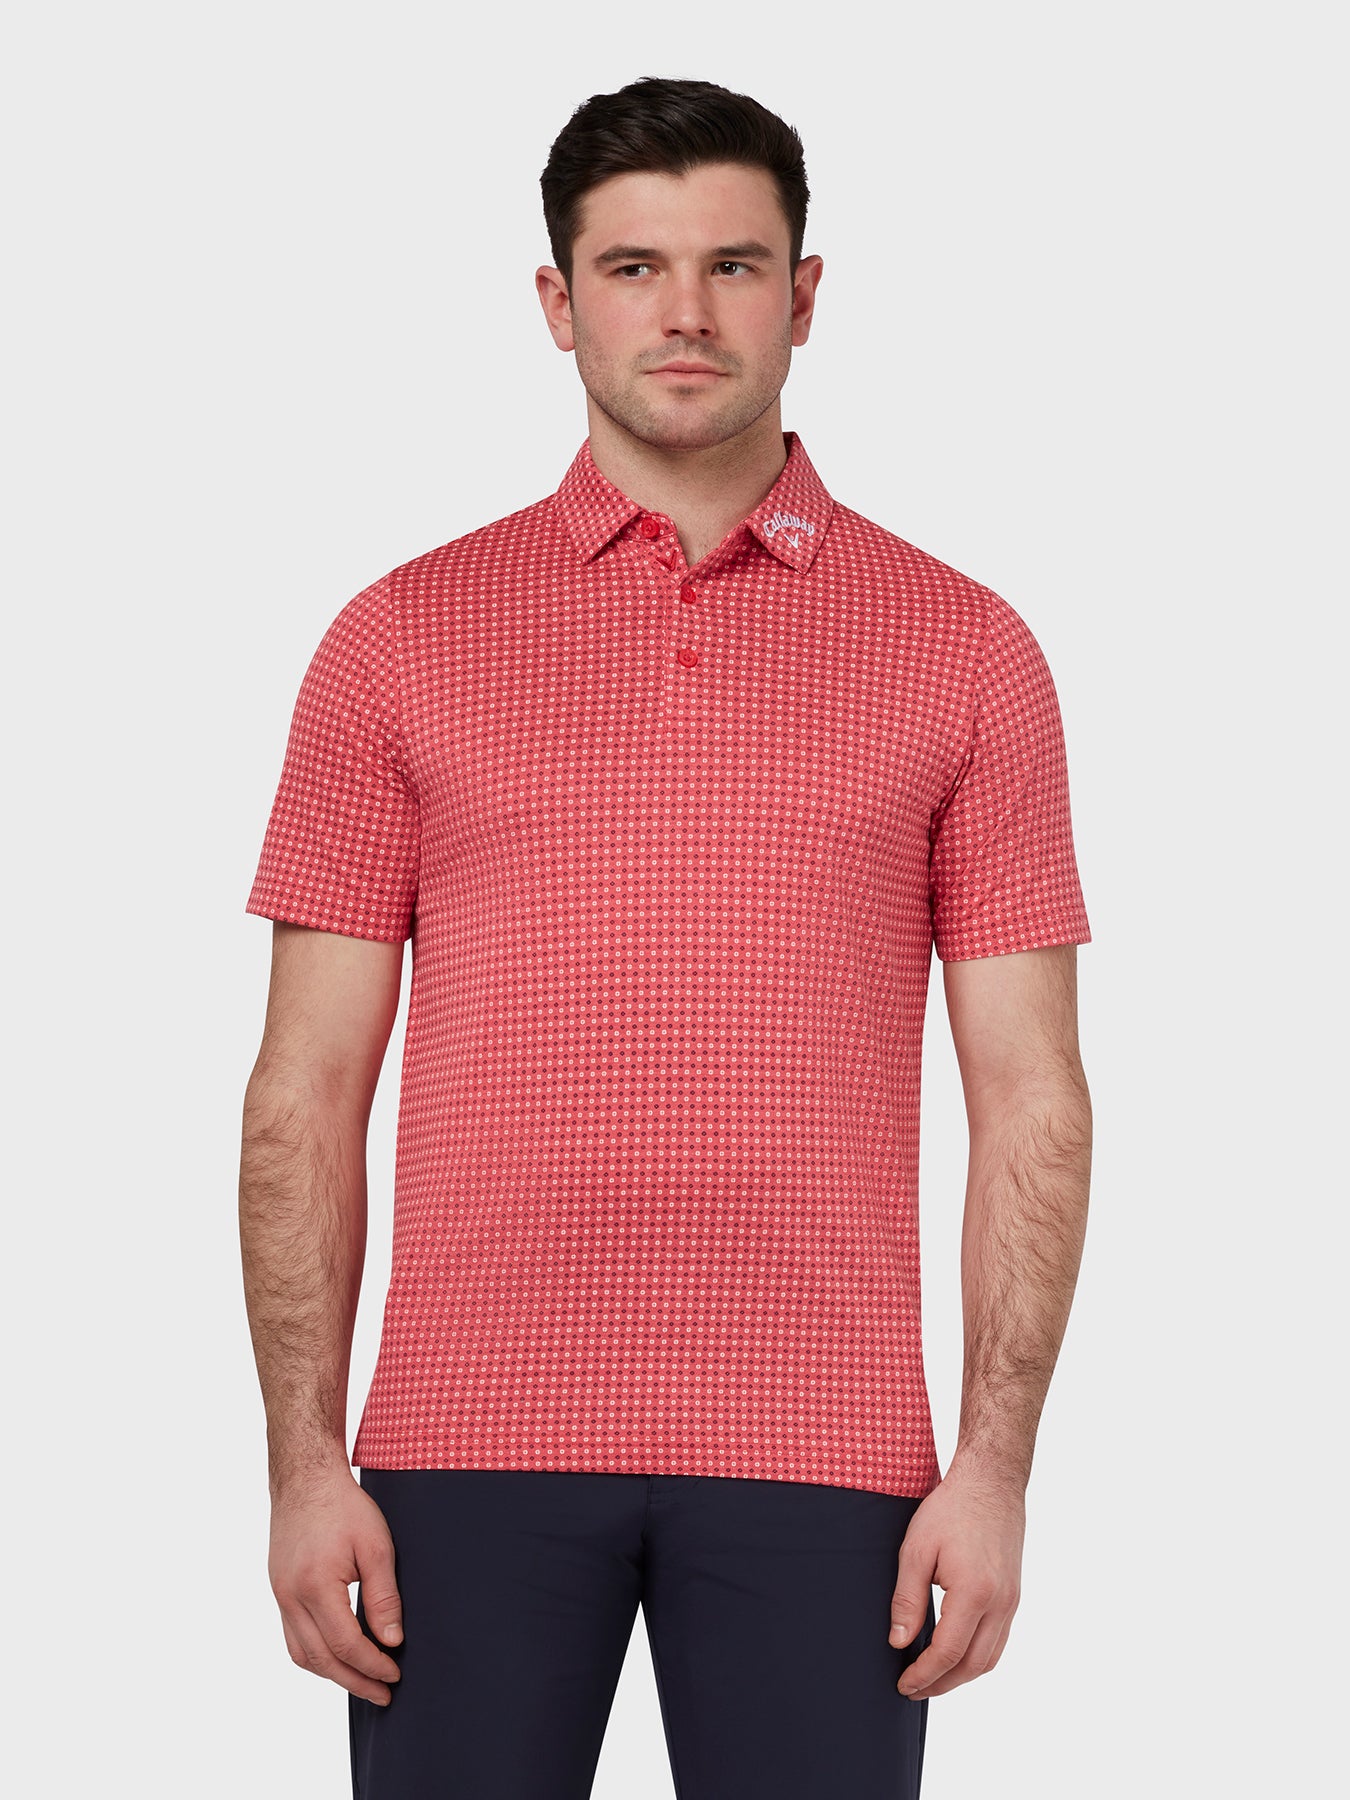 View Soft Touch Micro Print Polo In Teaberry Heather Teaberry Heather XXL information